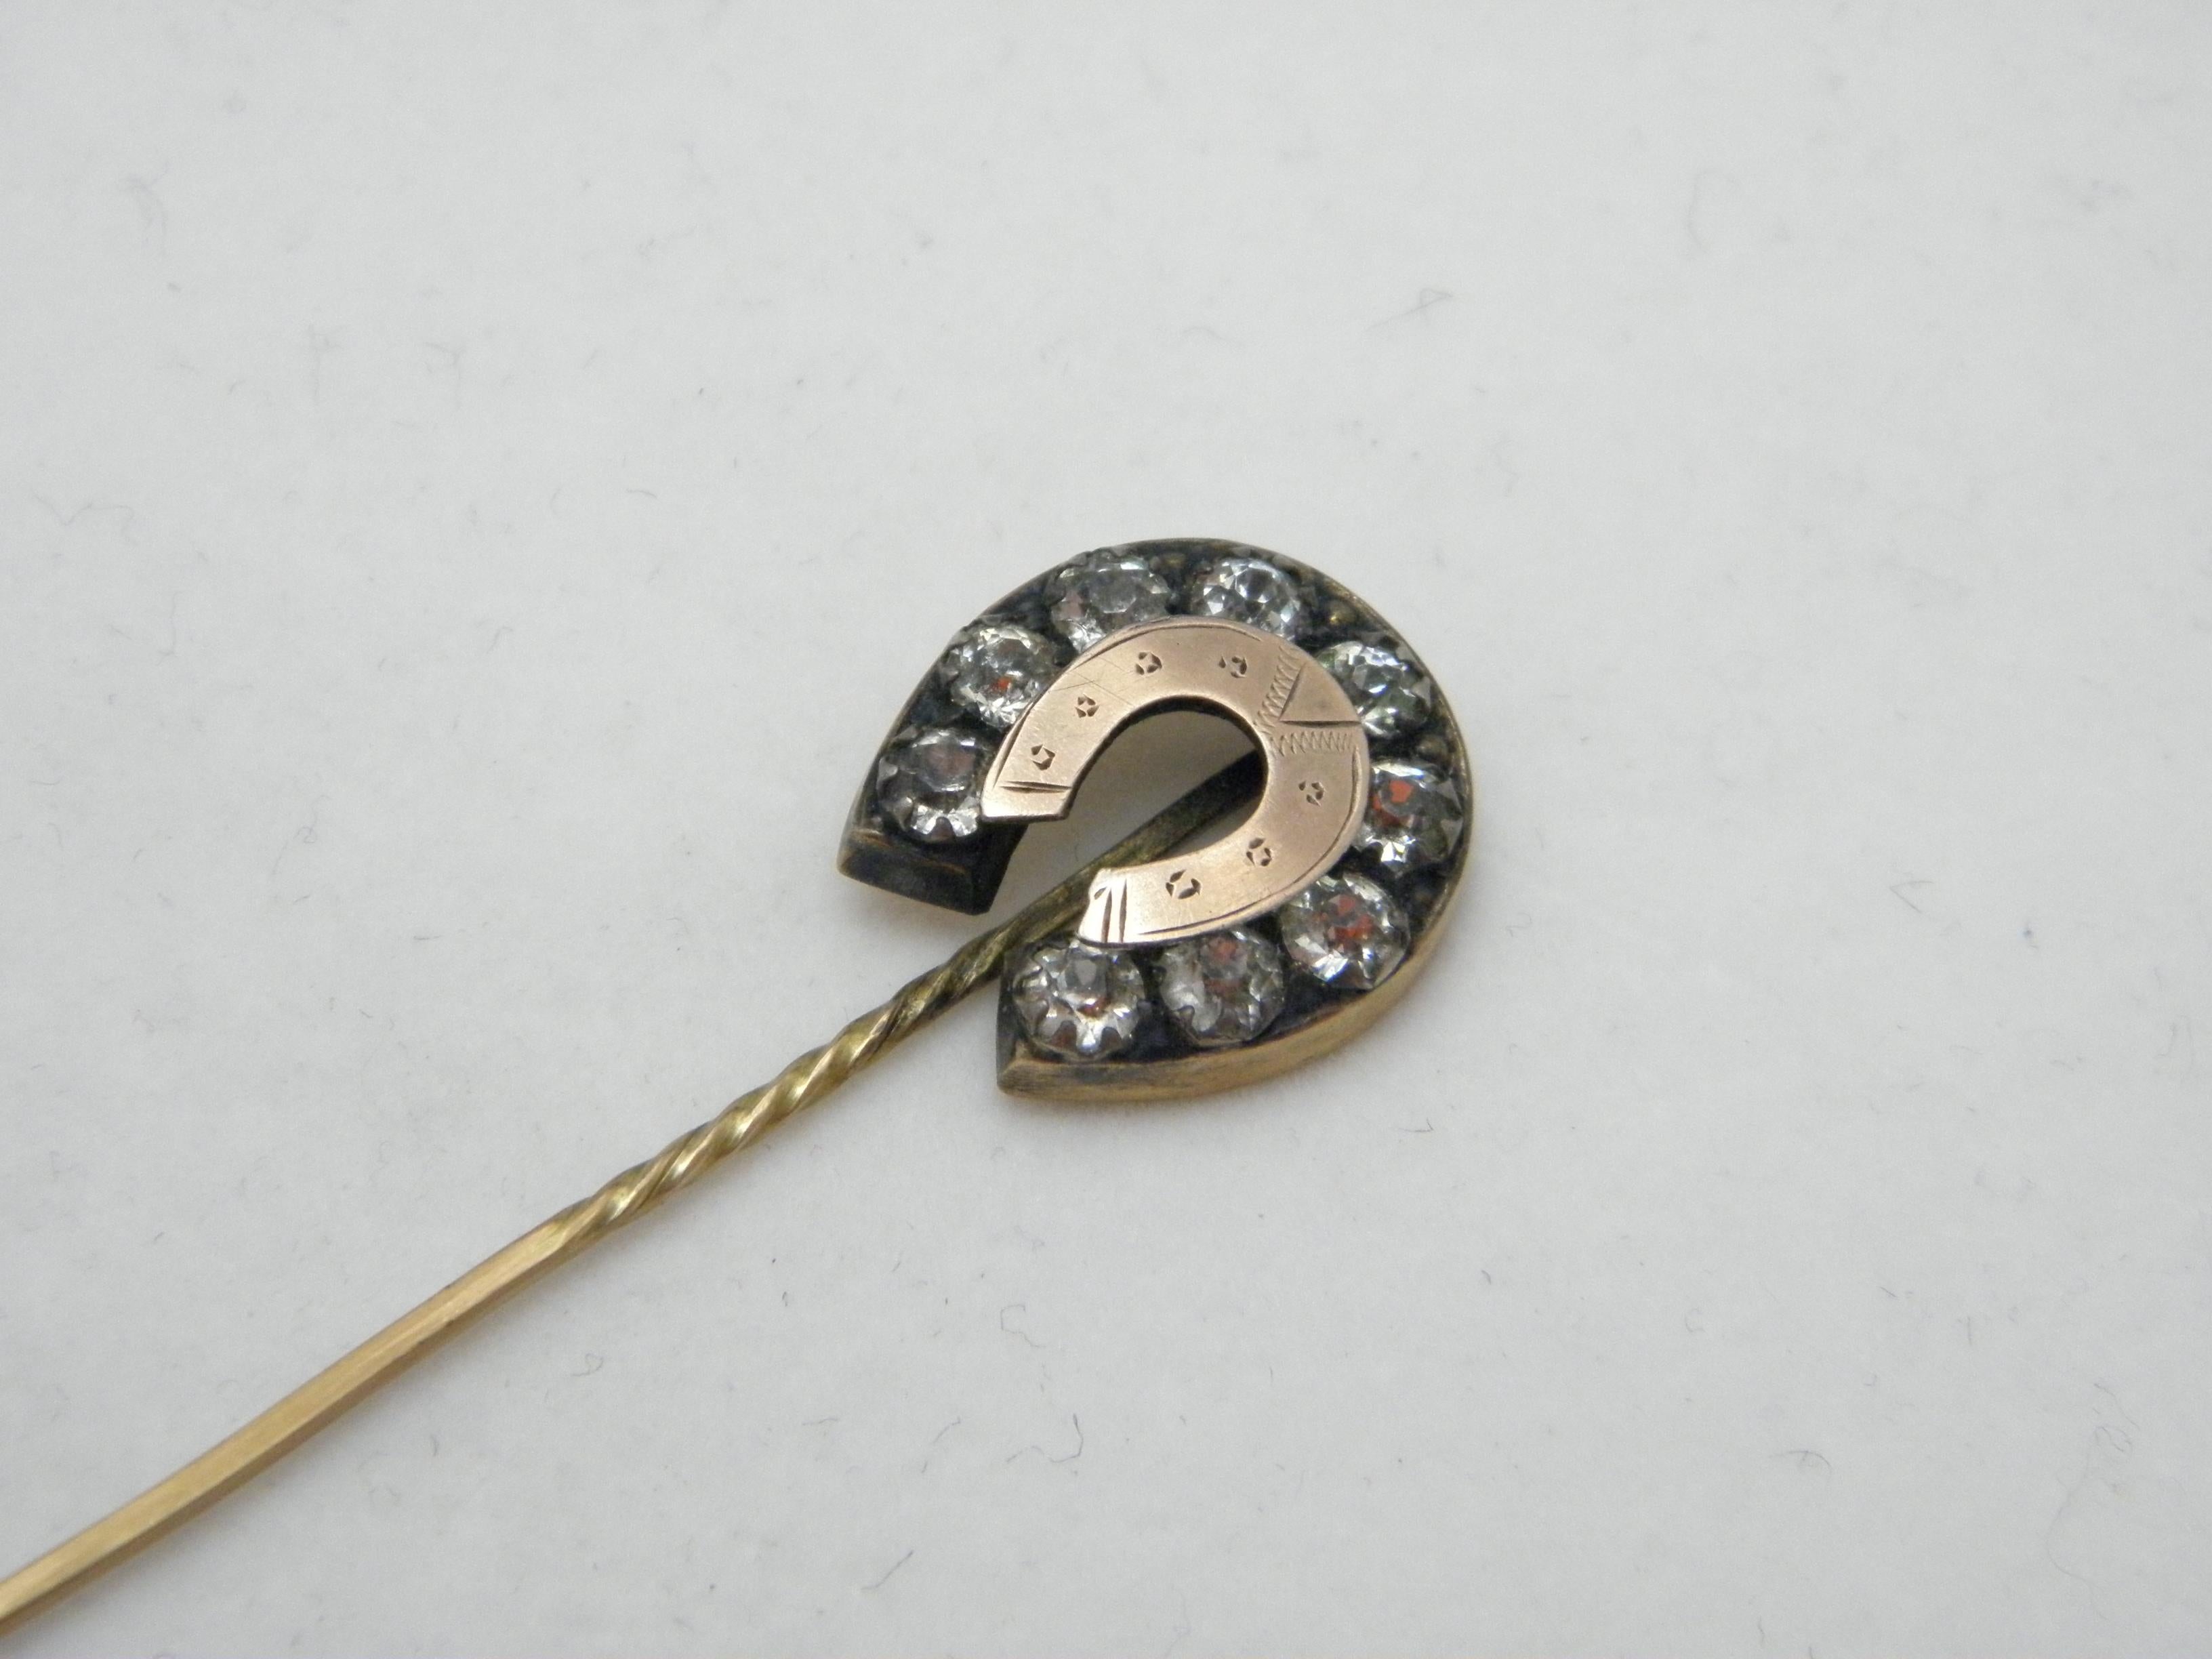 Victorian Antique 15ct Gold Diamond Paste Horseshoe Pin Brooch c1840 2.5g 625 Purity For Sale